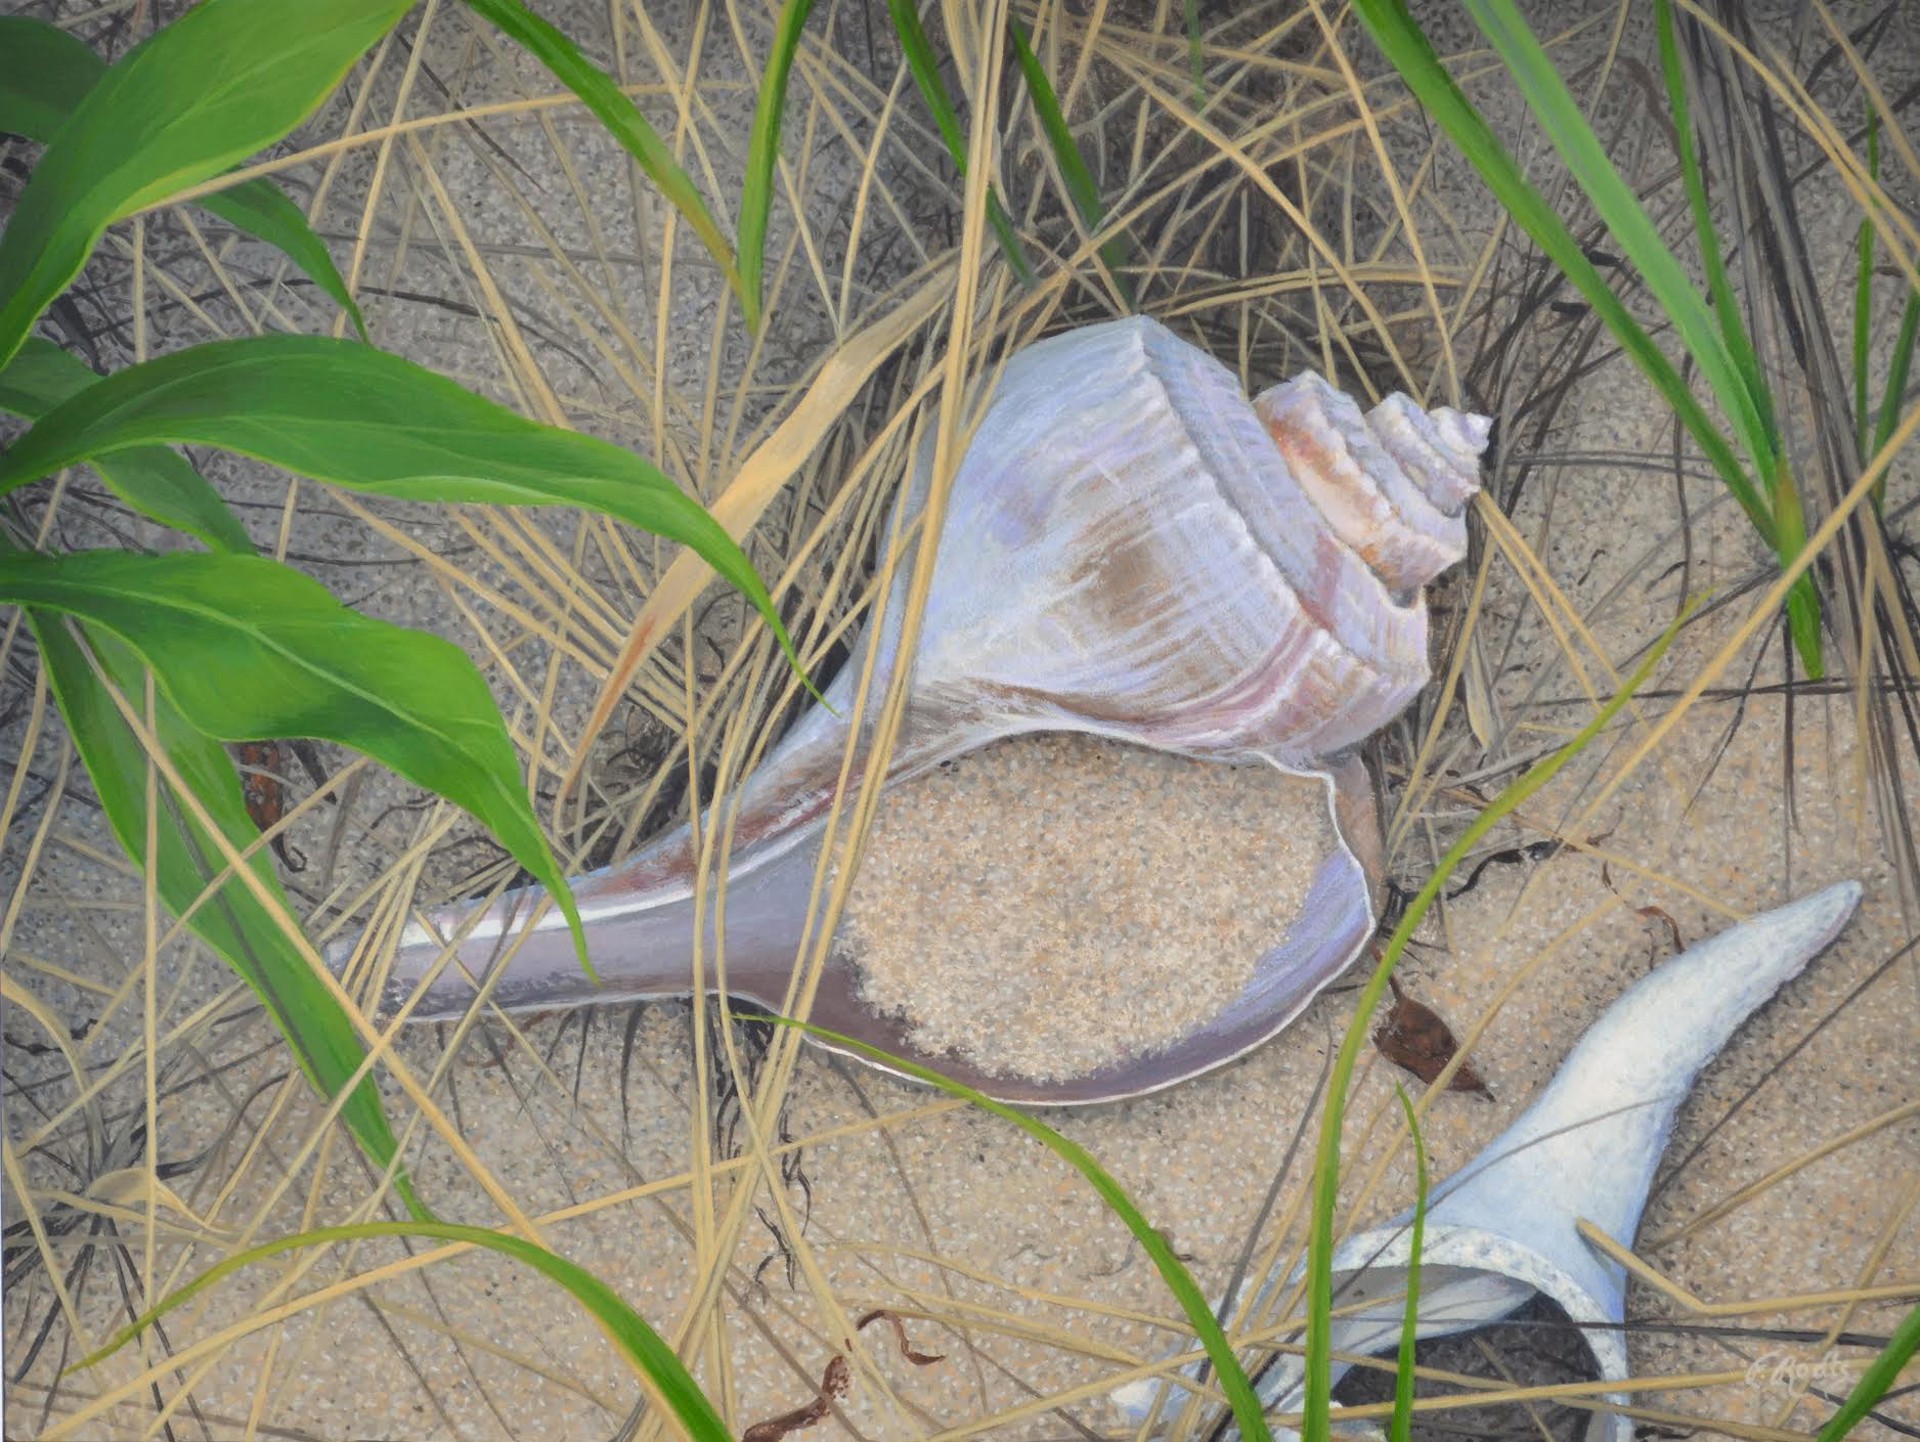 Shell in the Sand by Forrest Rodts